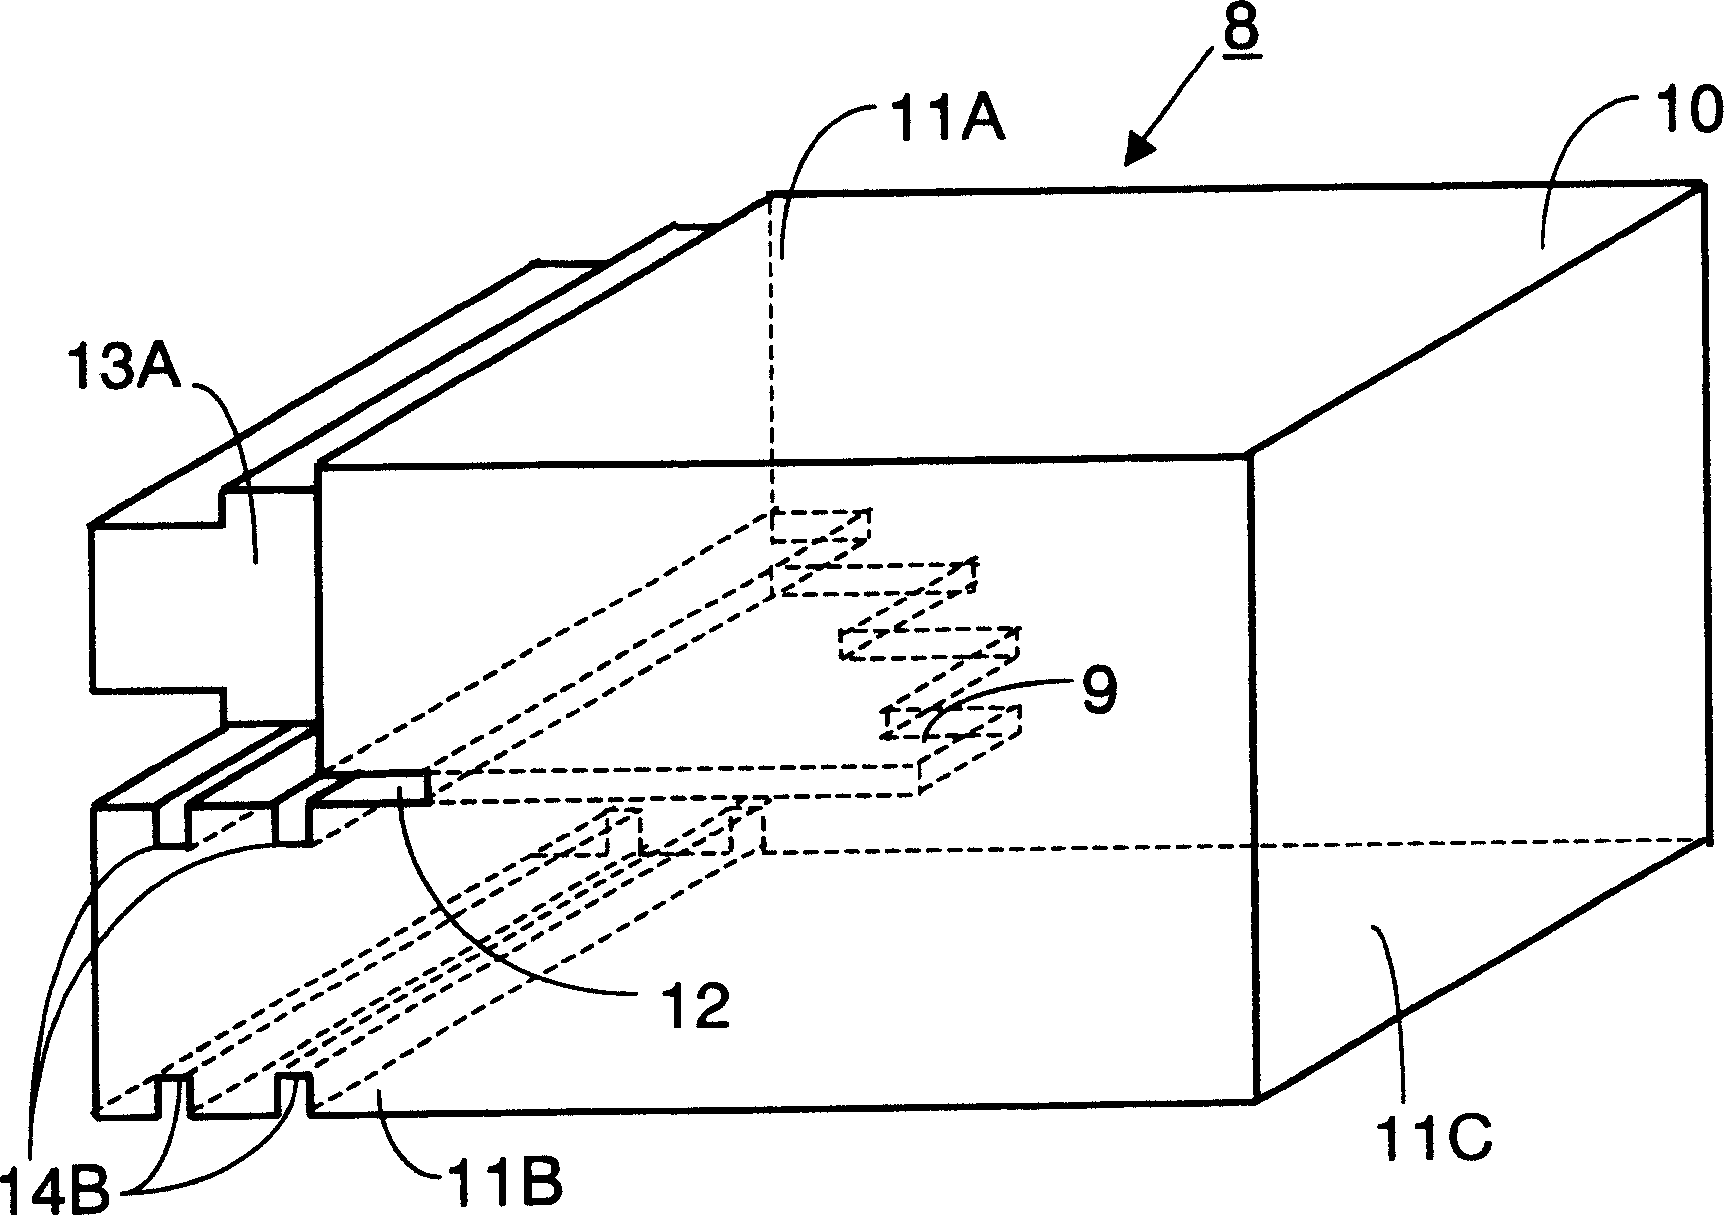 Frequency-separator waveguide module with double circular polarization